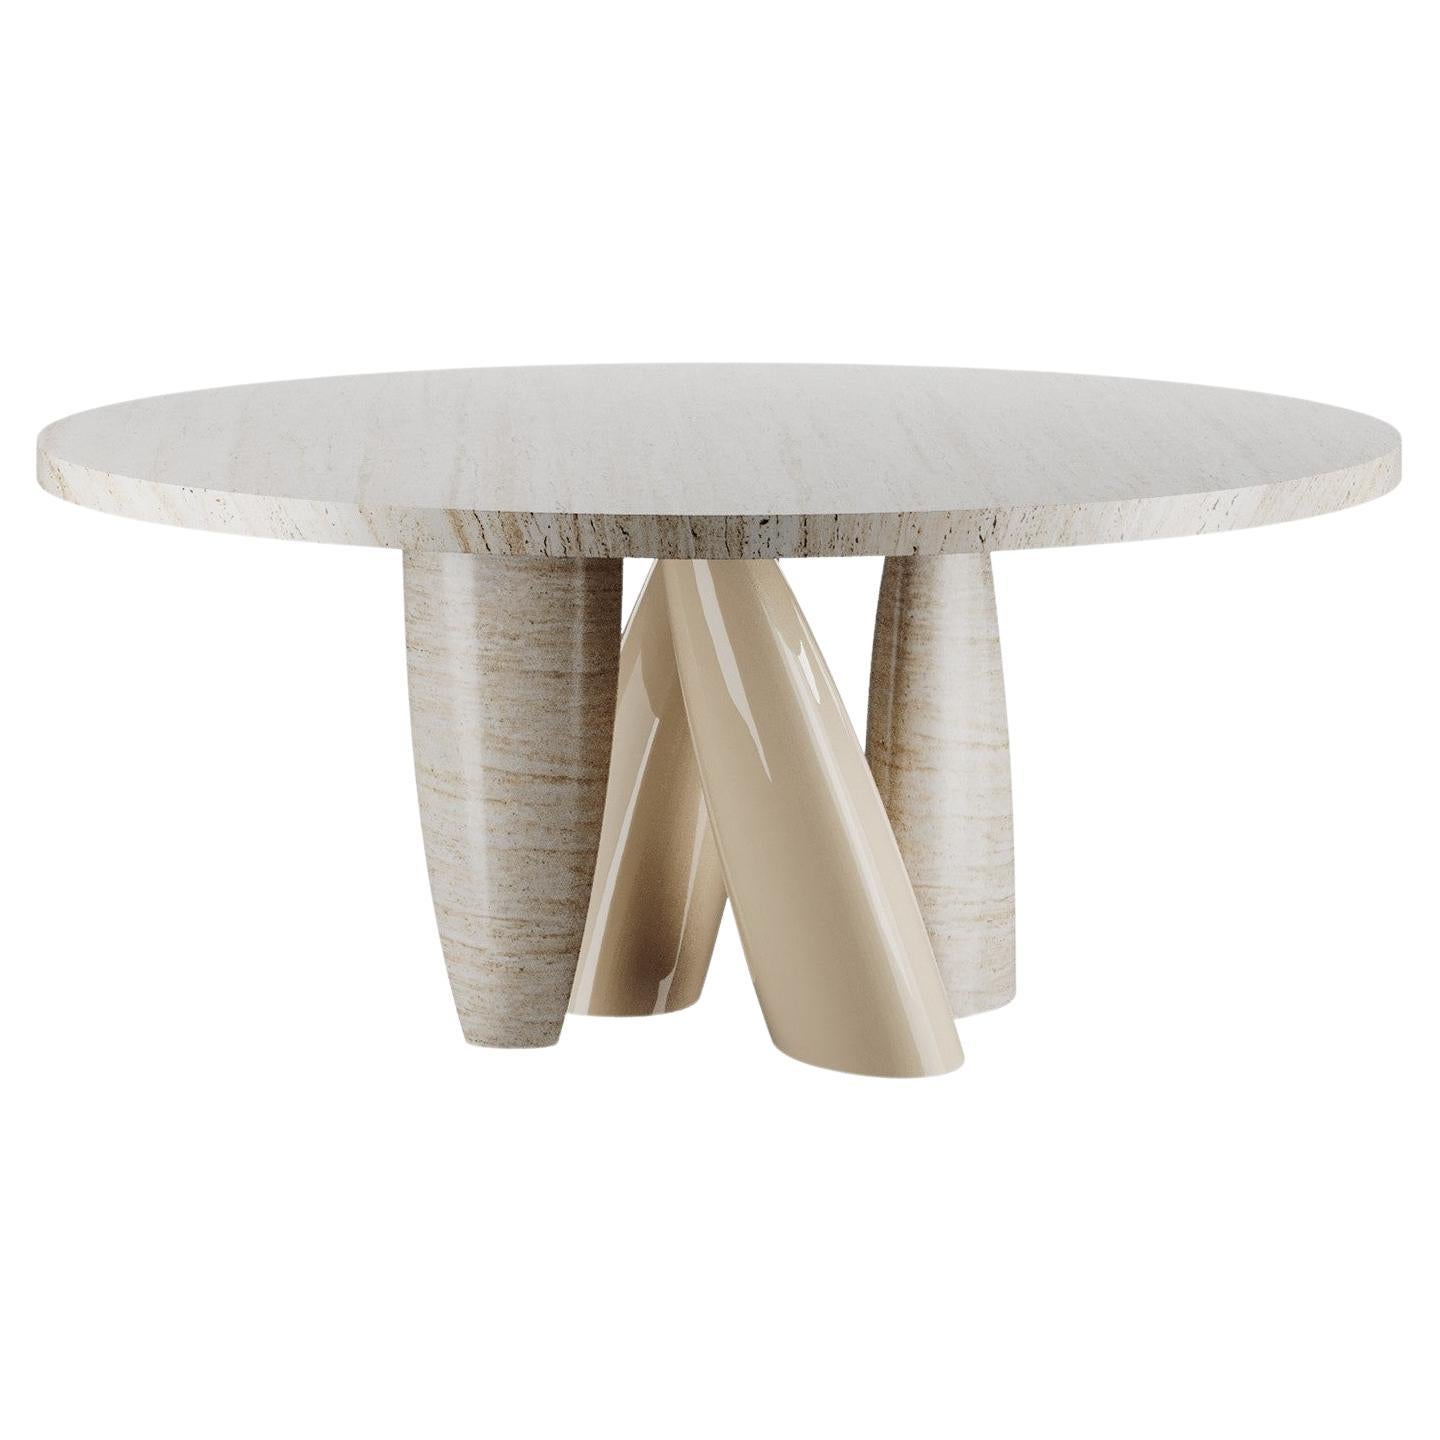 Minimal Organic Modern White Round Dining Table in Travertine Marble Lacquered For Sale